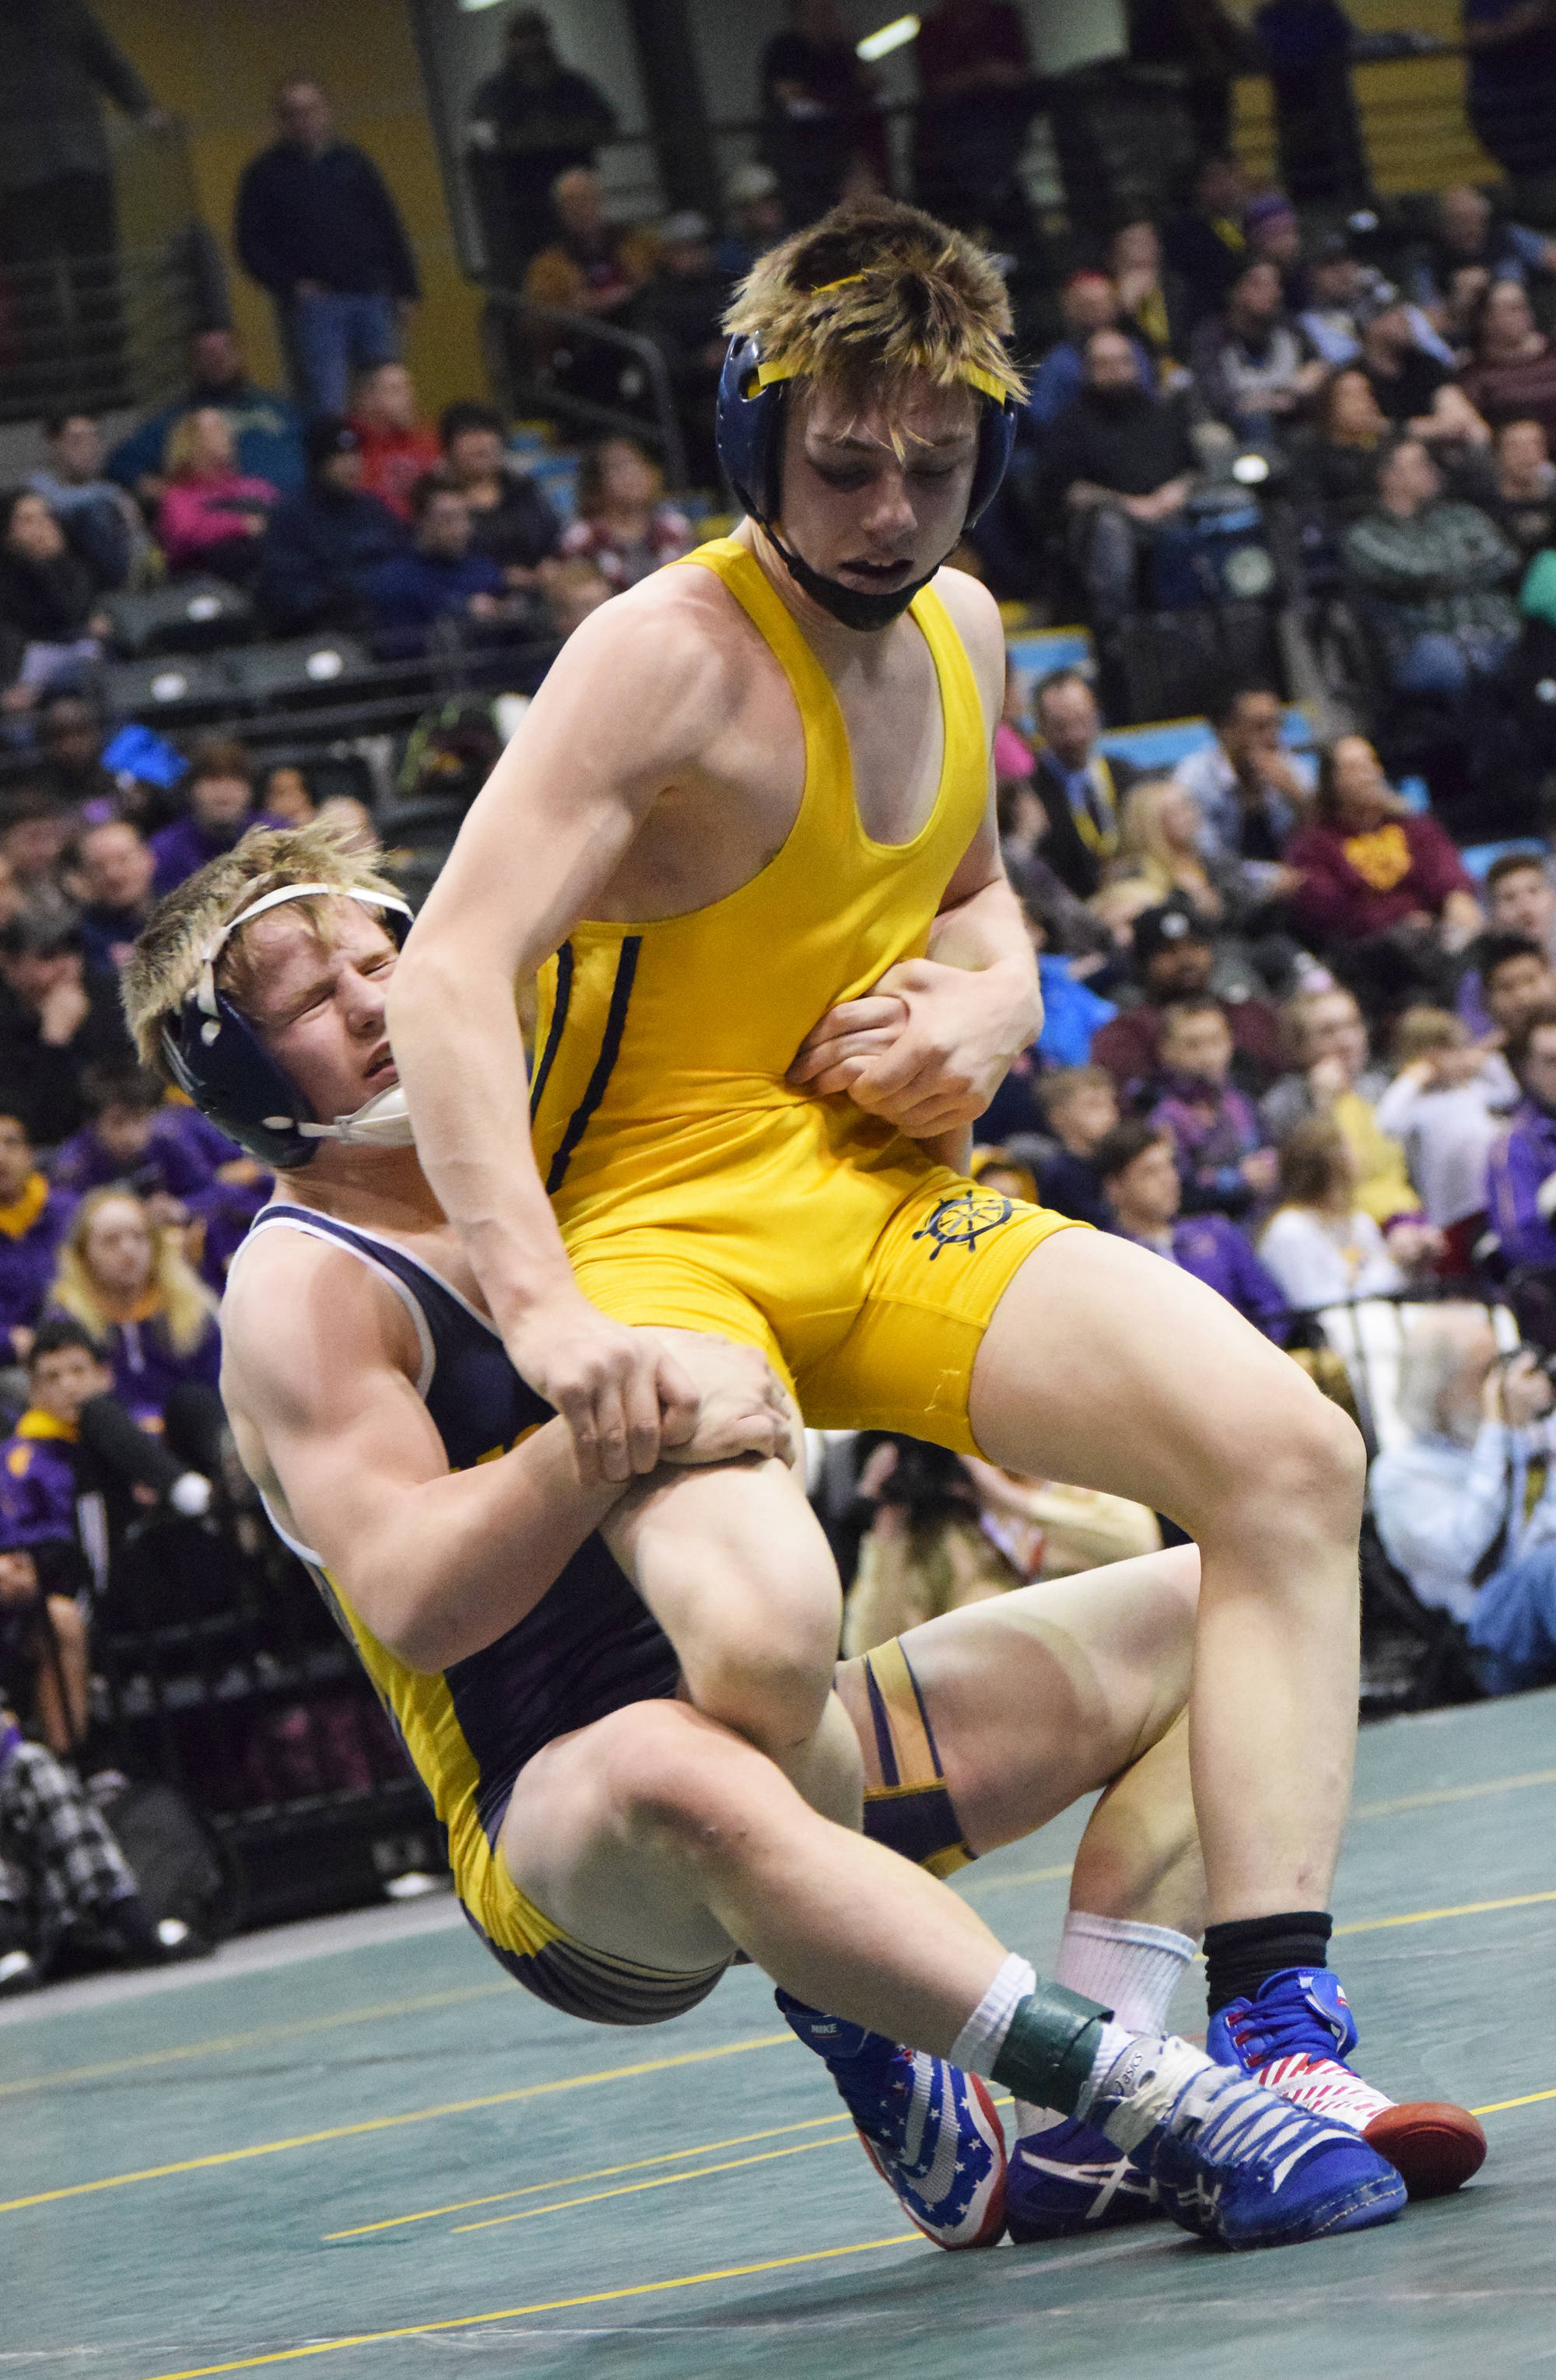 Monroe Catholic’s Riley Rust (left) takes down Homer’s Wayne Newman in the 126-pound final Saturday night at the Division II state wrestling championships at the Alaska Airlines Center in Anchorage. (Photo by Joey Klecka/Peninsula Clarion)